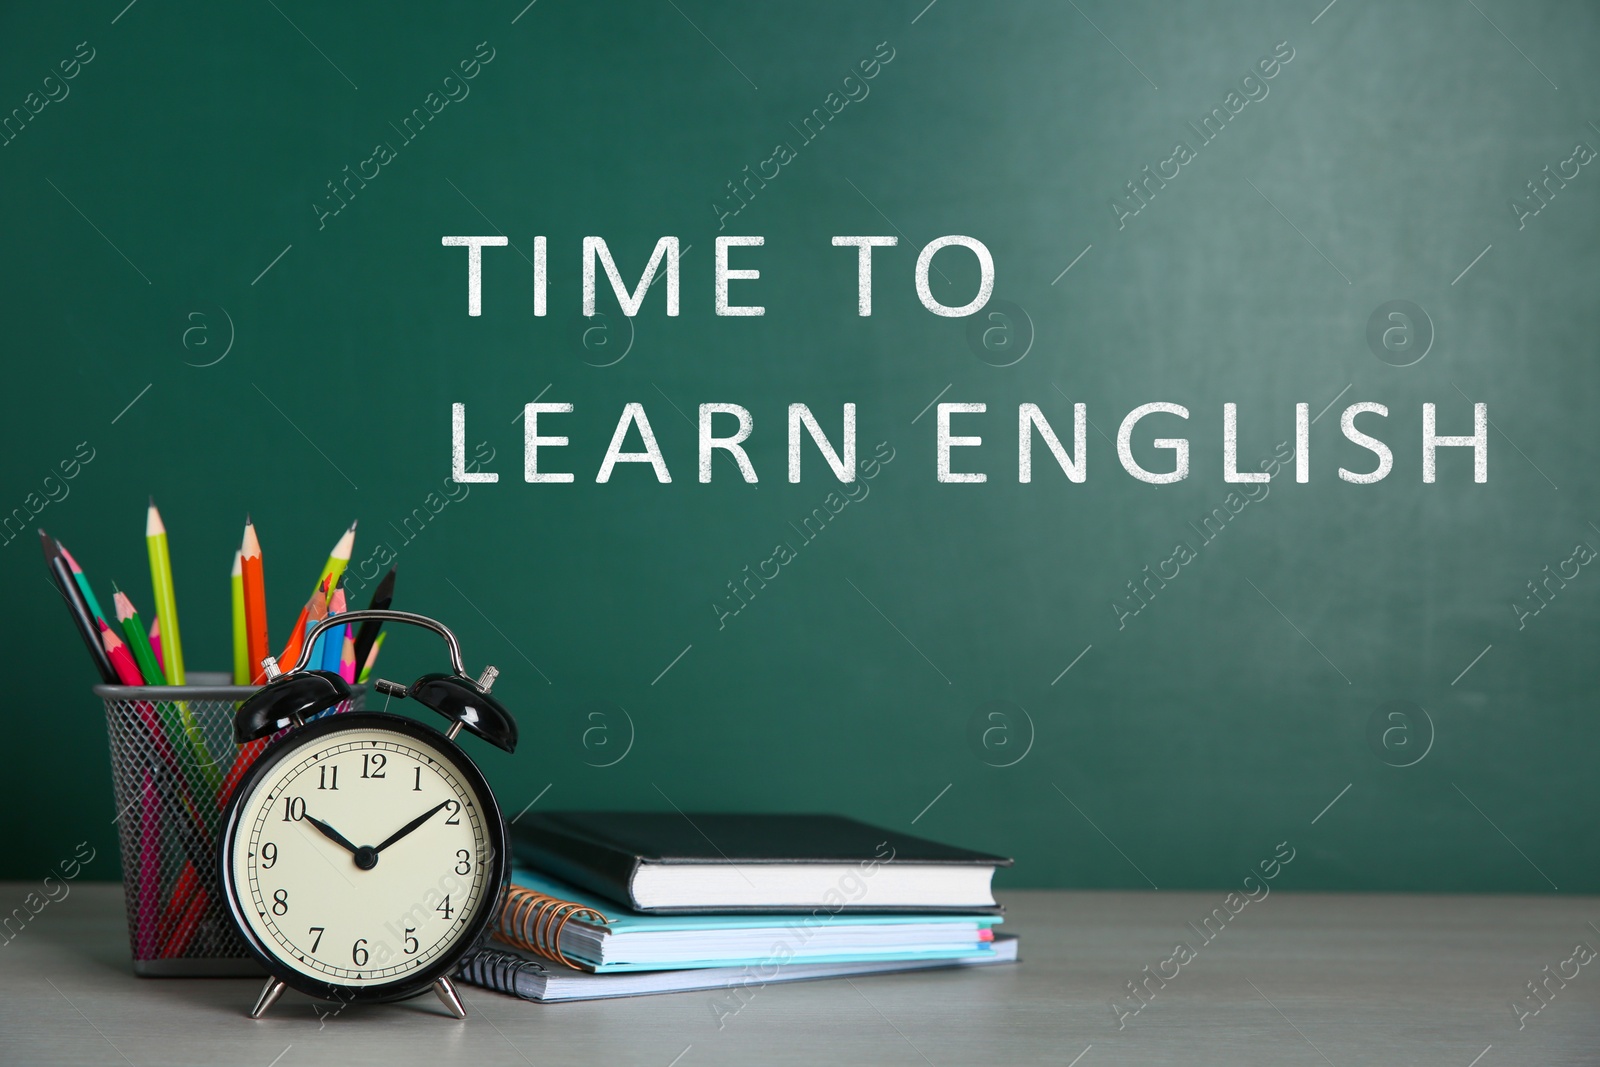 Image of Alarm clock and stationery on table near green chalkboard with text Time to Learn English